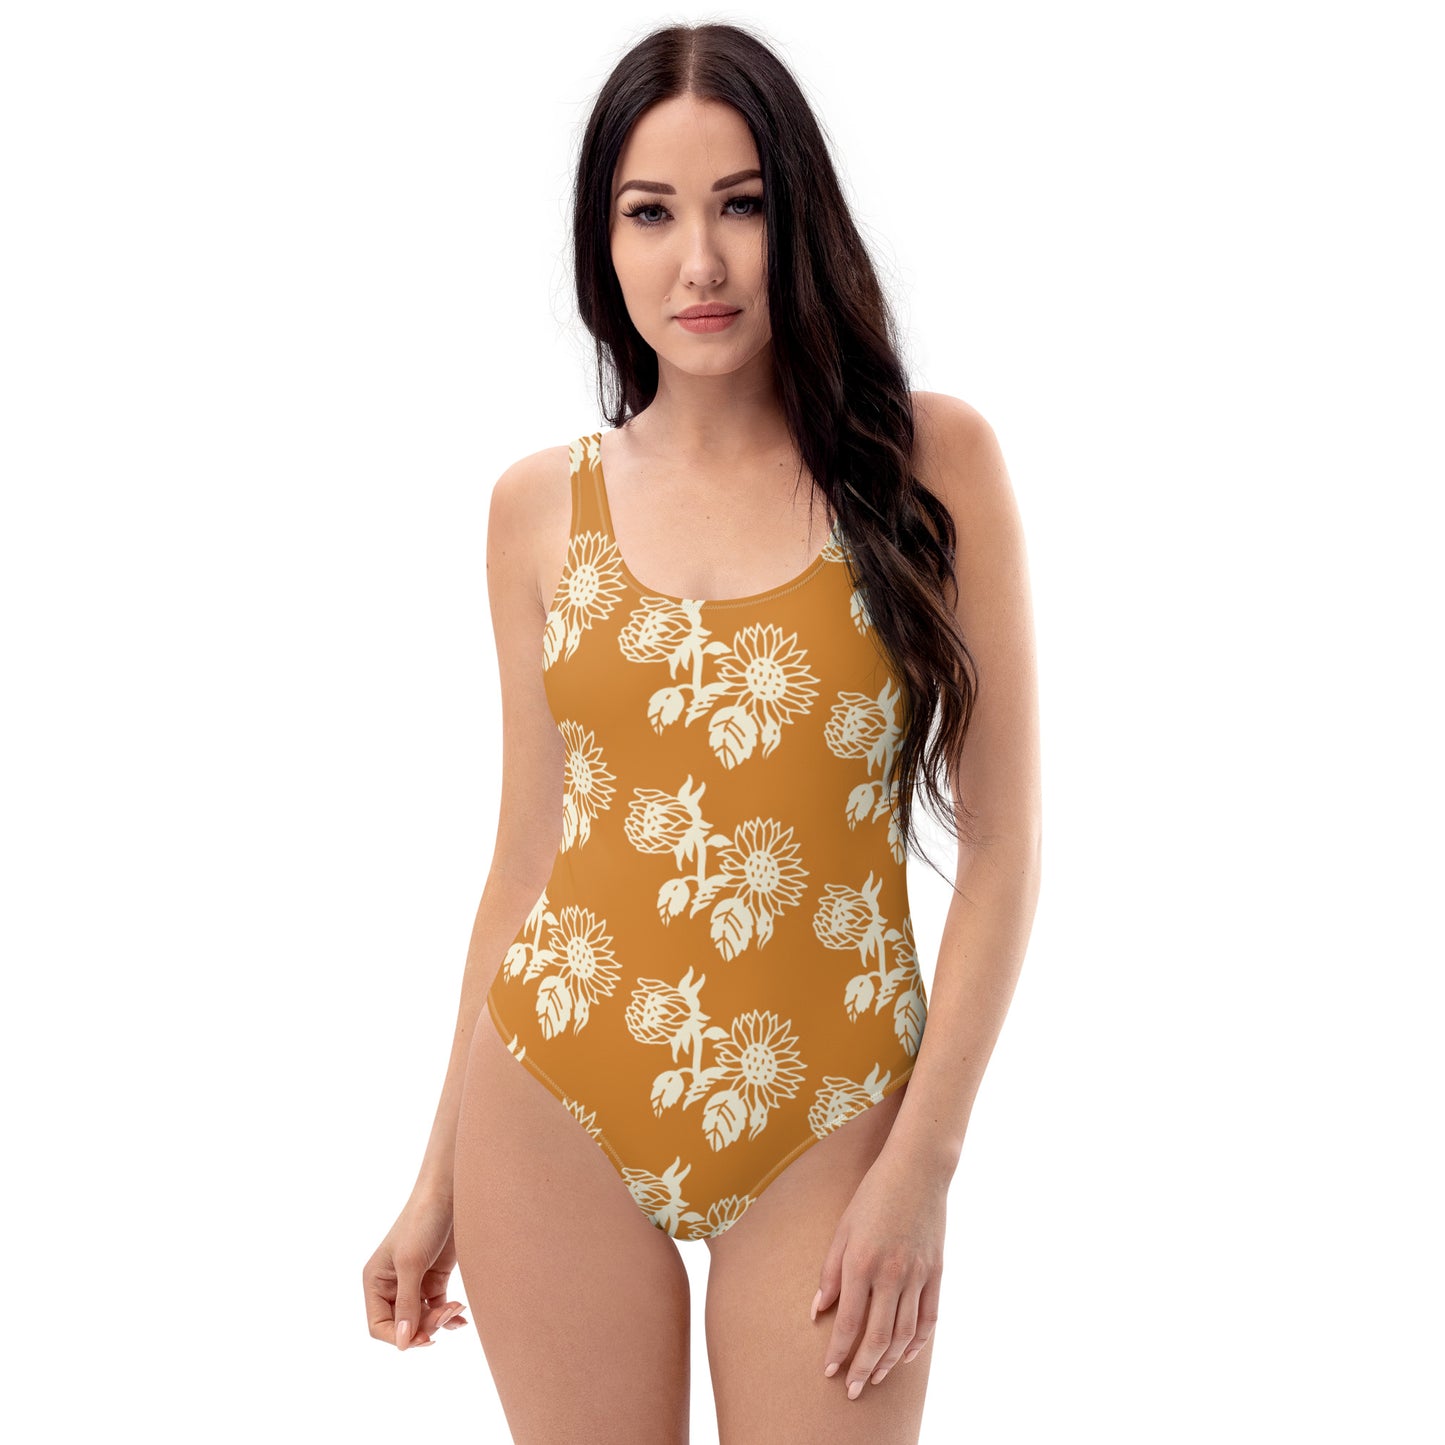 Bronze Floral One-Piece Swimsuit